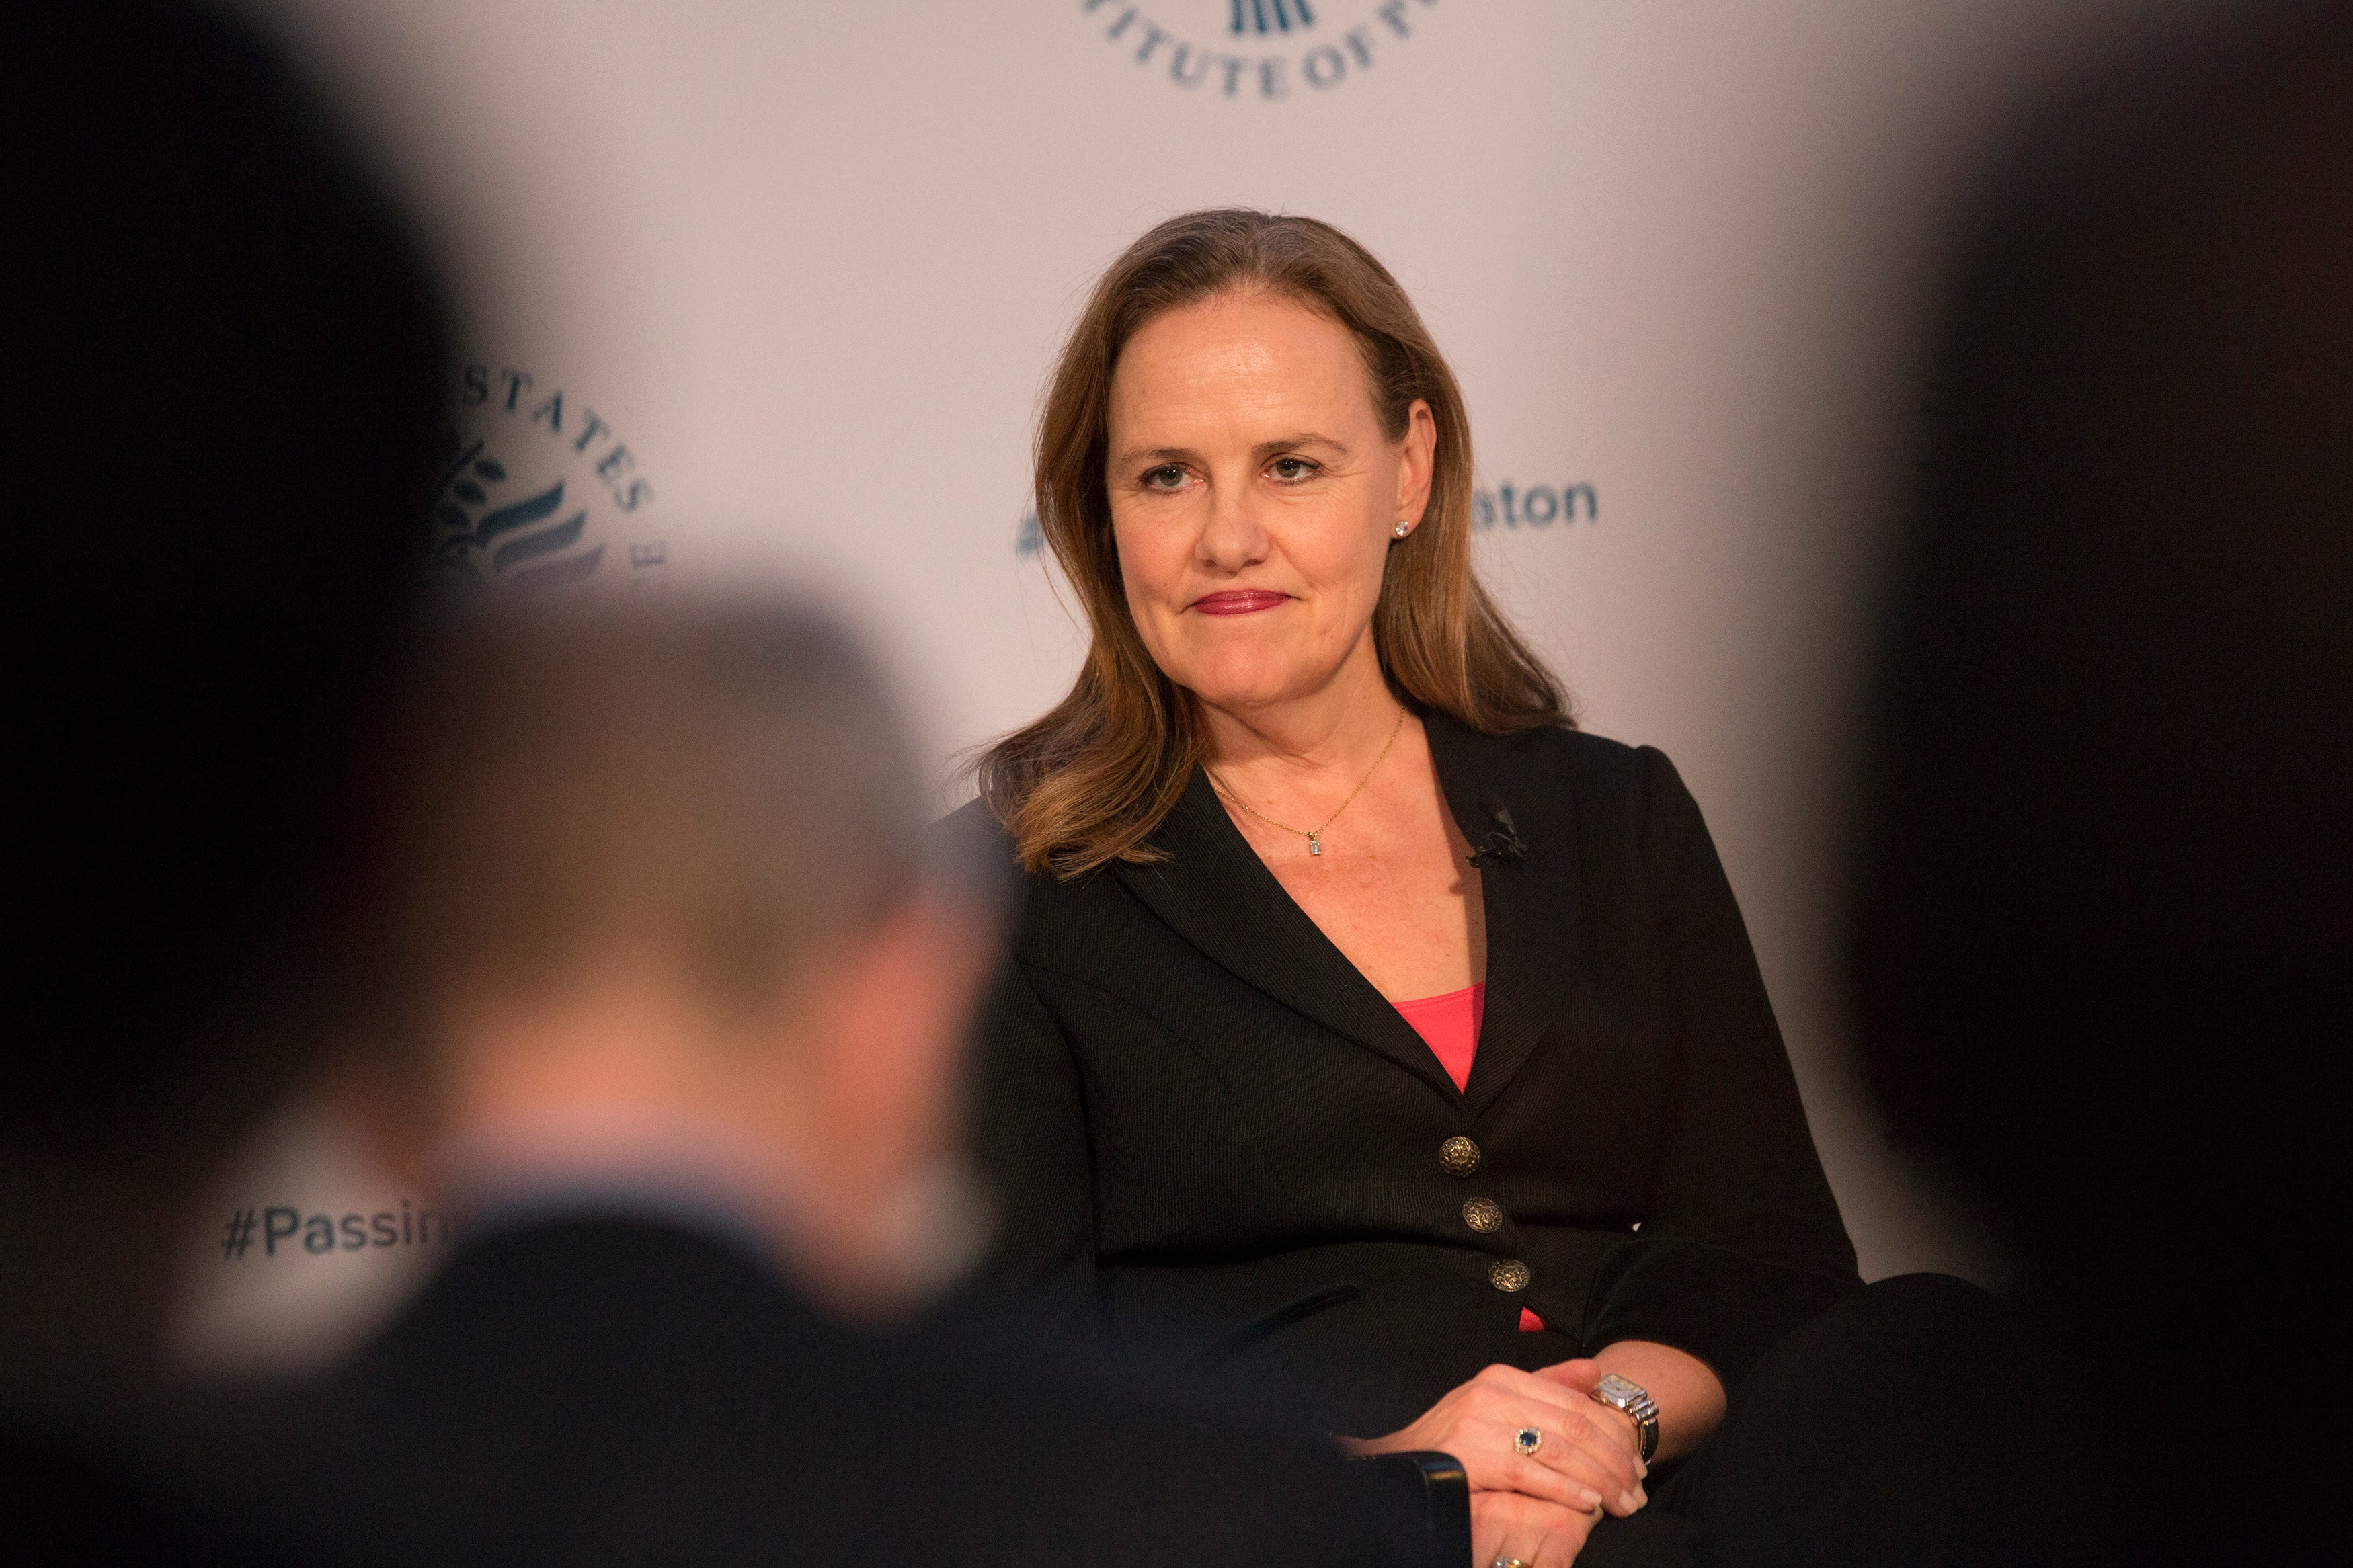 Michele Flournoy is tipped for a top job in the Biden administration